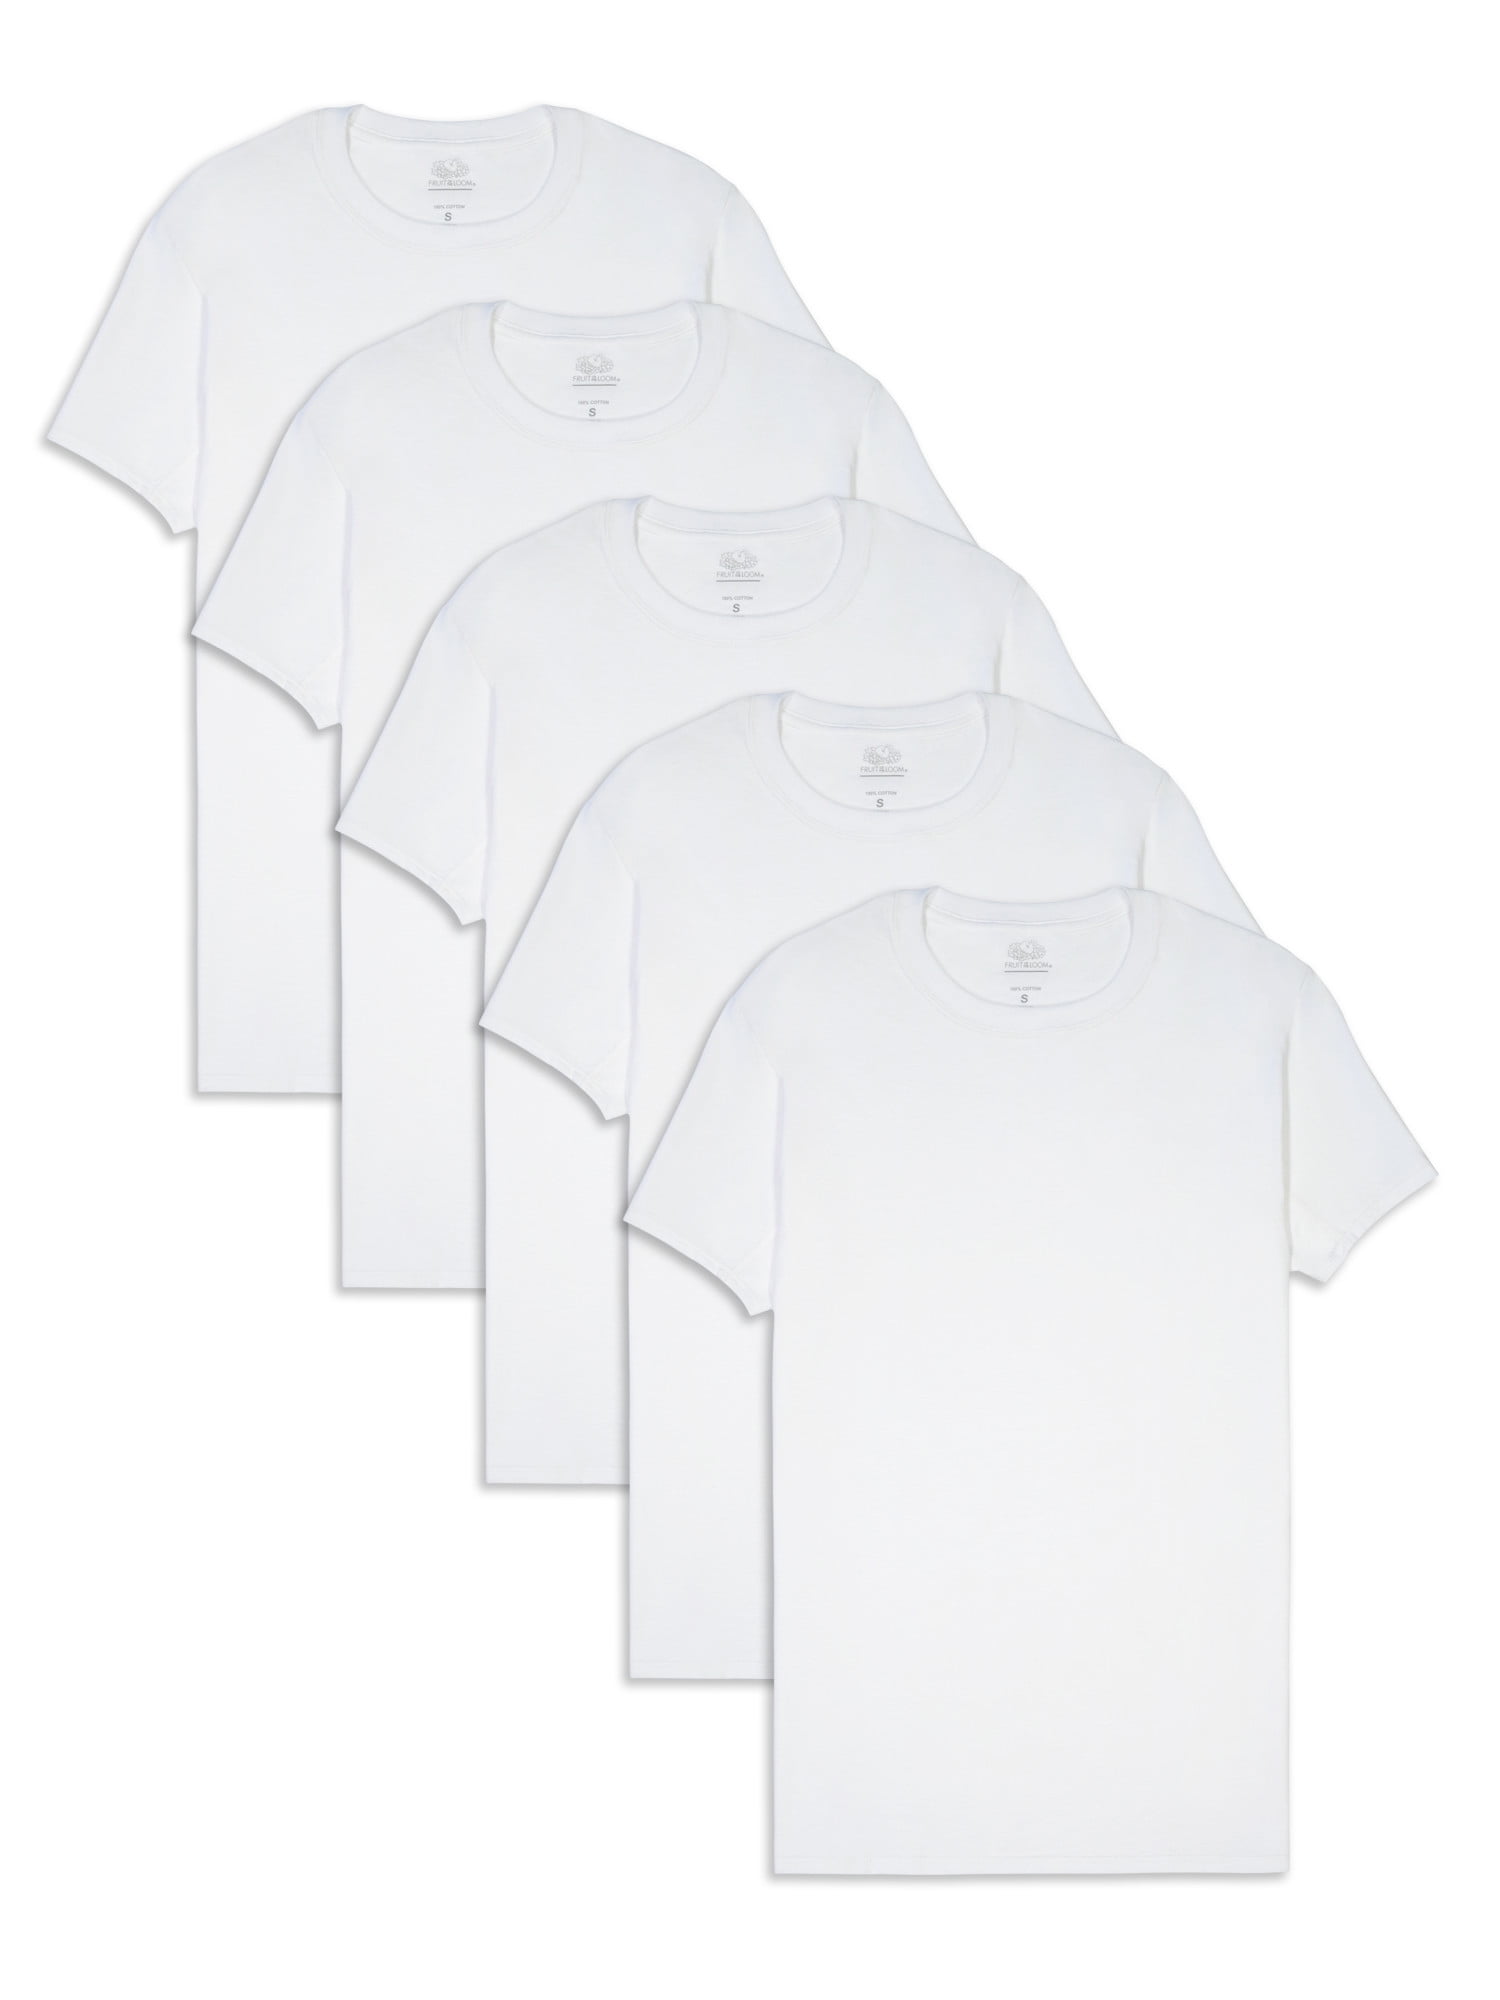 Fruit of the Loom Men's CoolZone White Crew T-Shirts, 5 Pack - Walmart.com